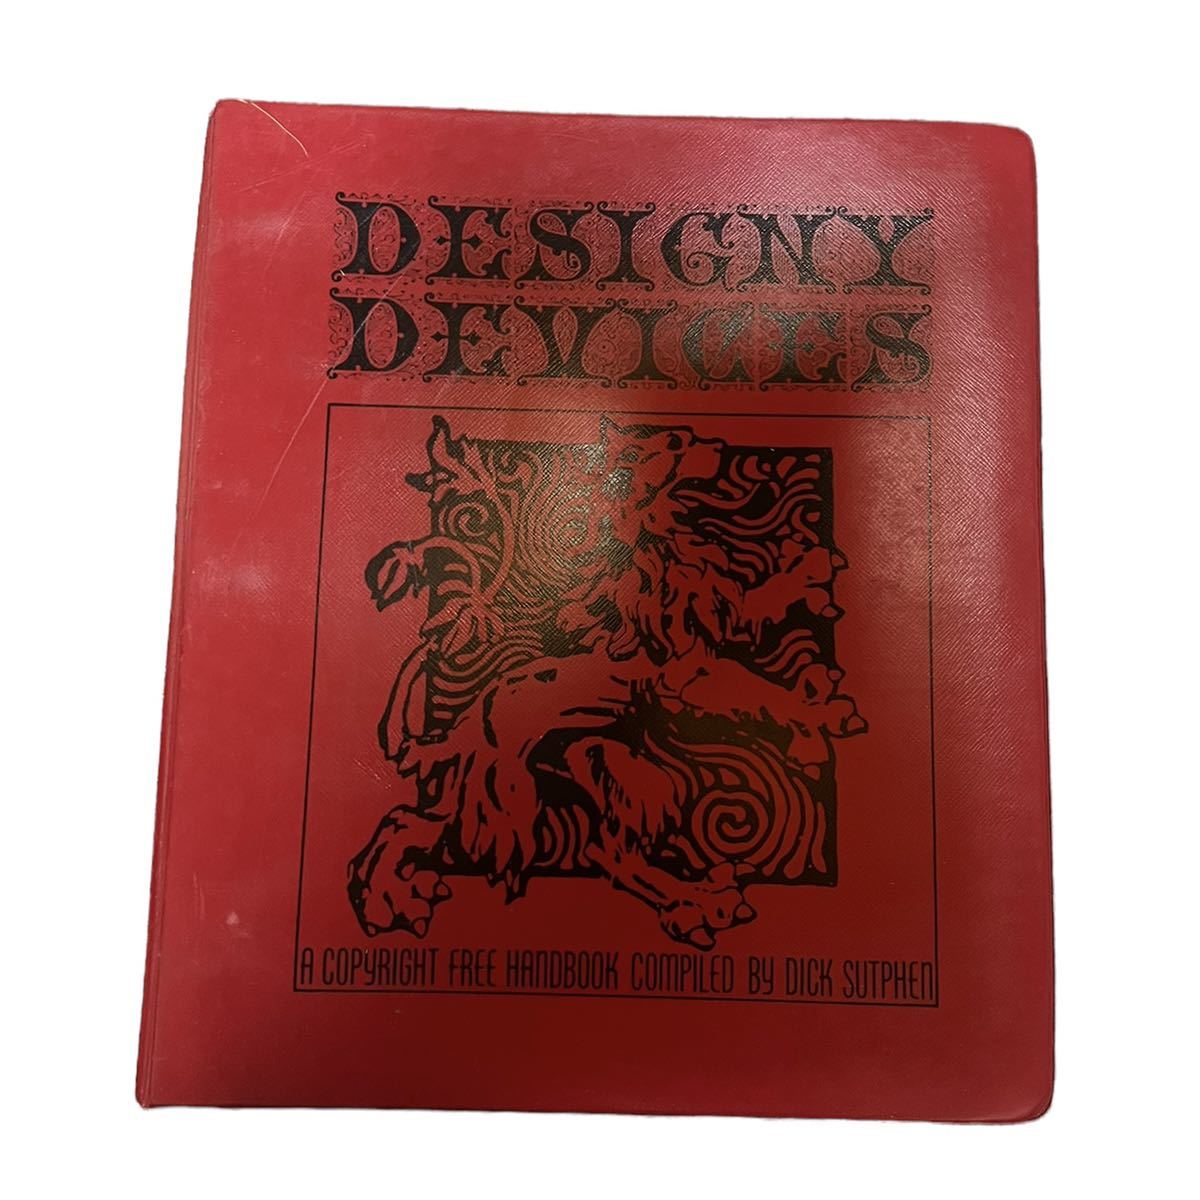 [DESIGNY DEVICES]1967 year design illustration collection foreign book Vintage antique a-ru*n-vo- old book secondhand book 